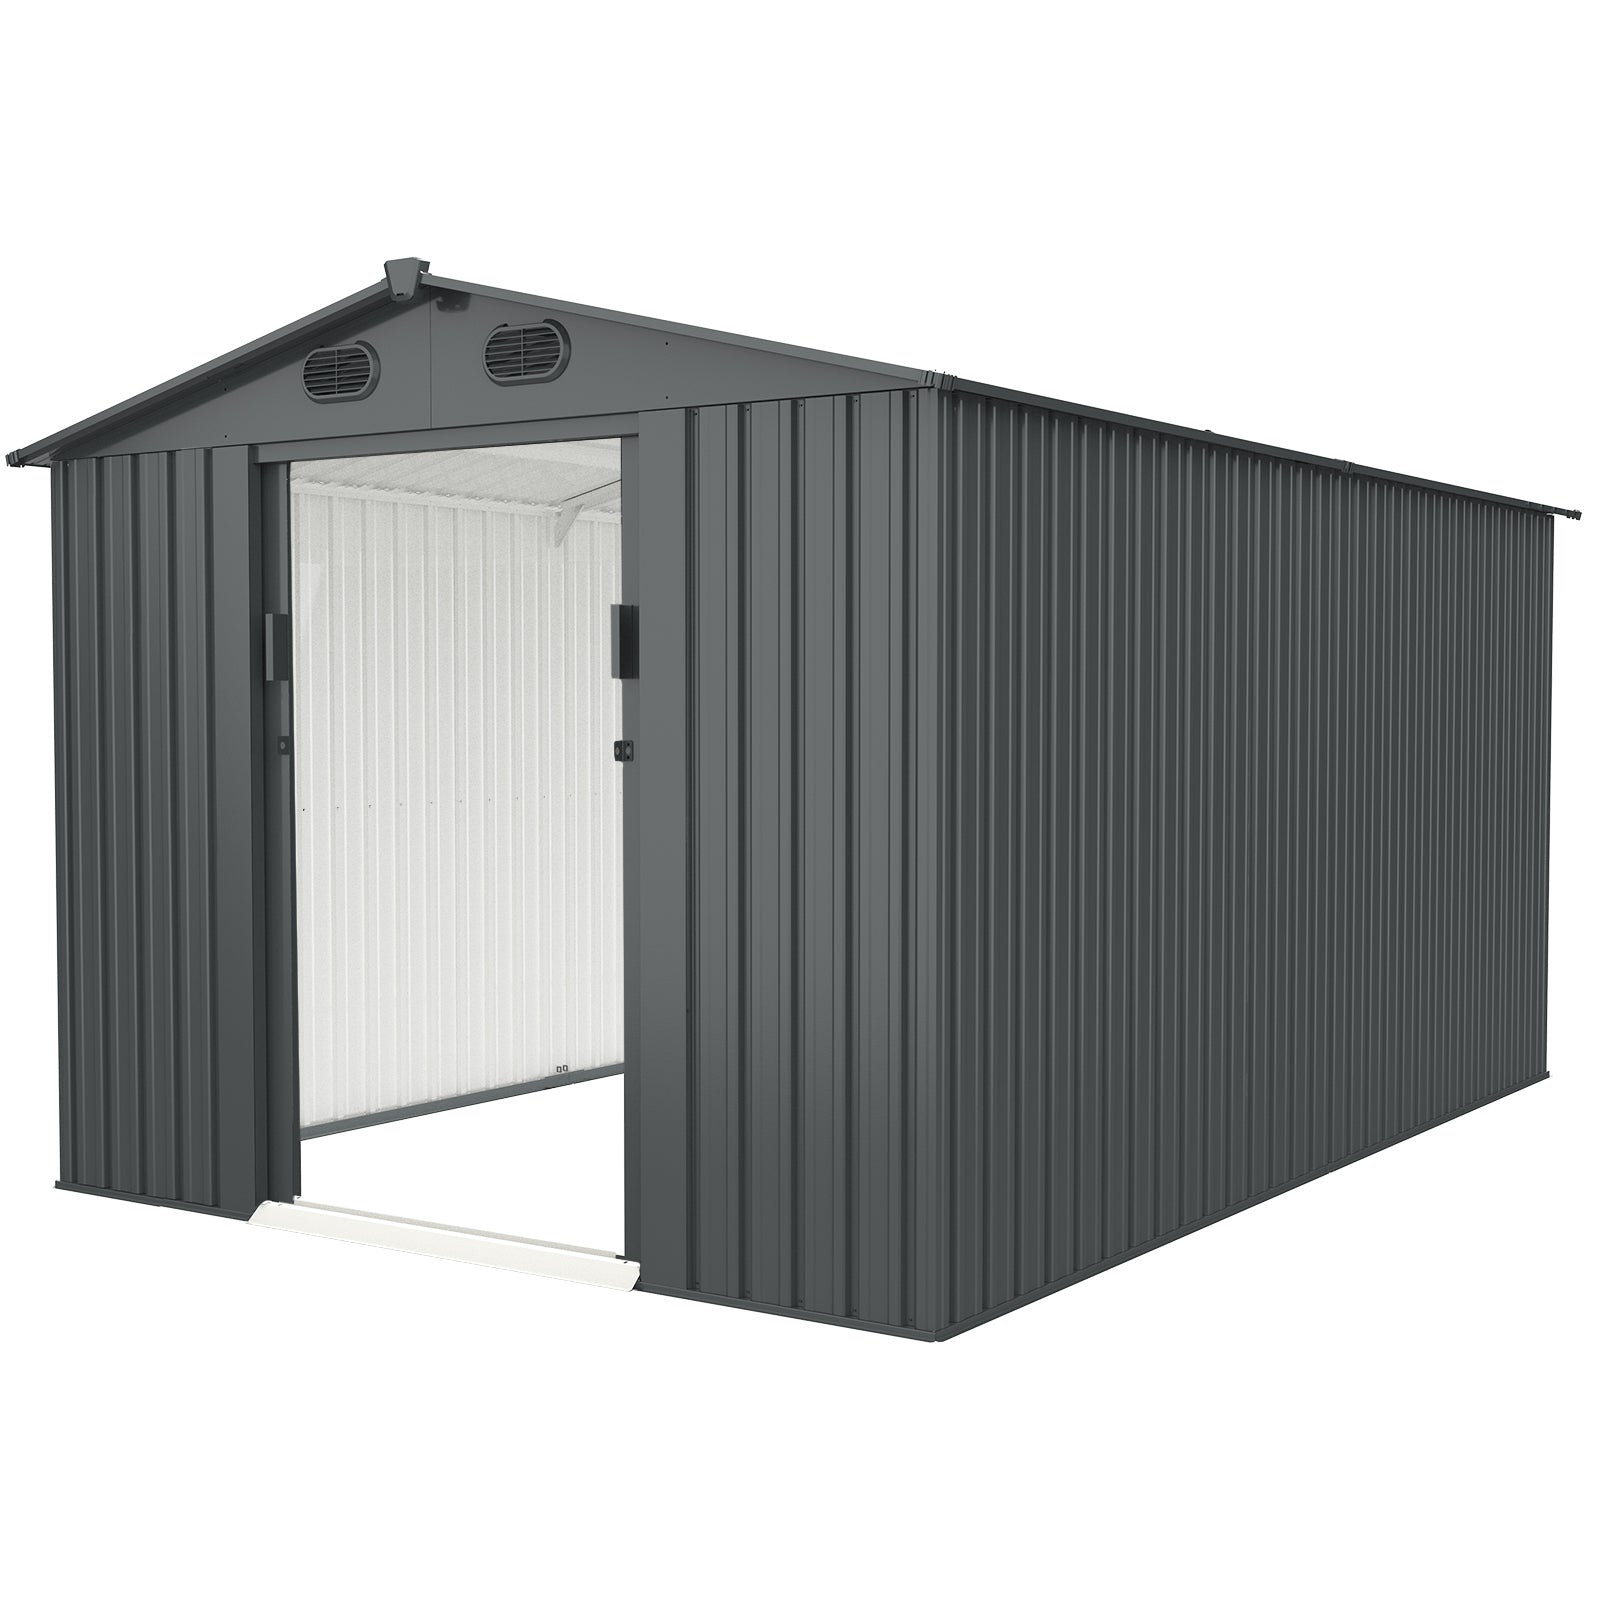 NatureVault, 8' X 12' Galvanized Steel Garden Shed with 4 Vents & Lockable Double Sliding Door, Utility Tool Shed Storage House for Backyard